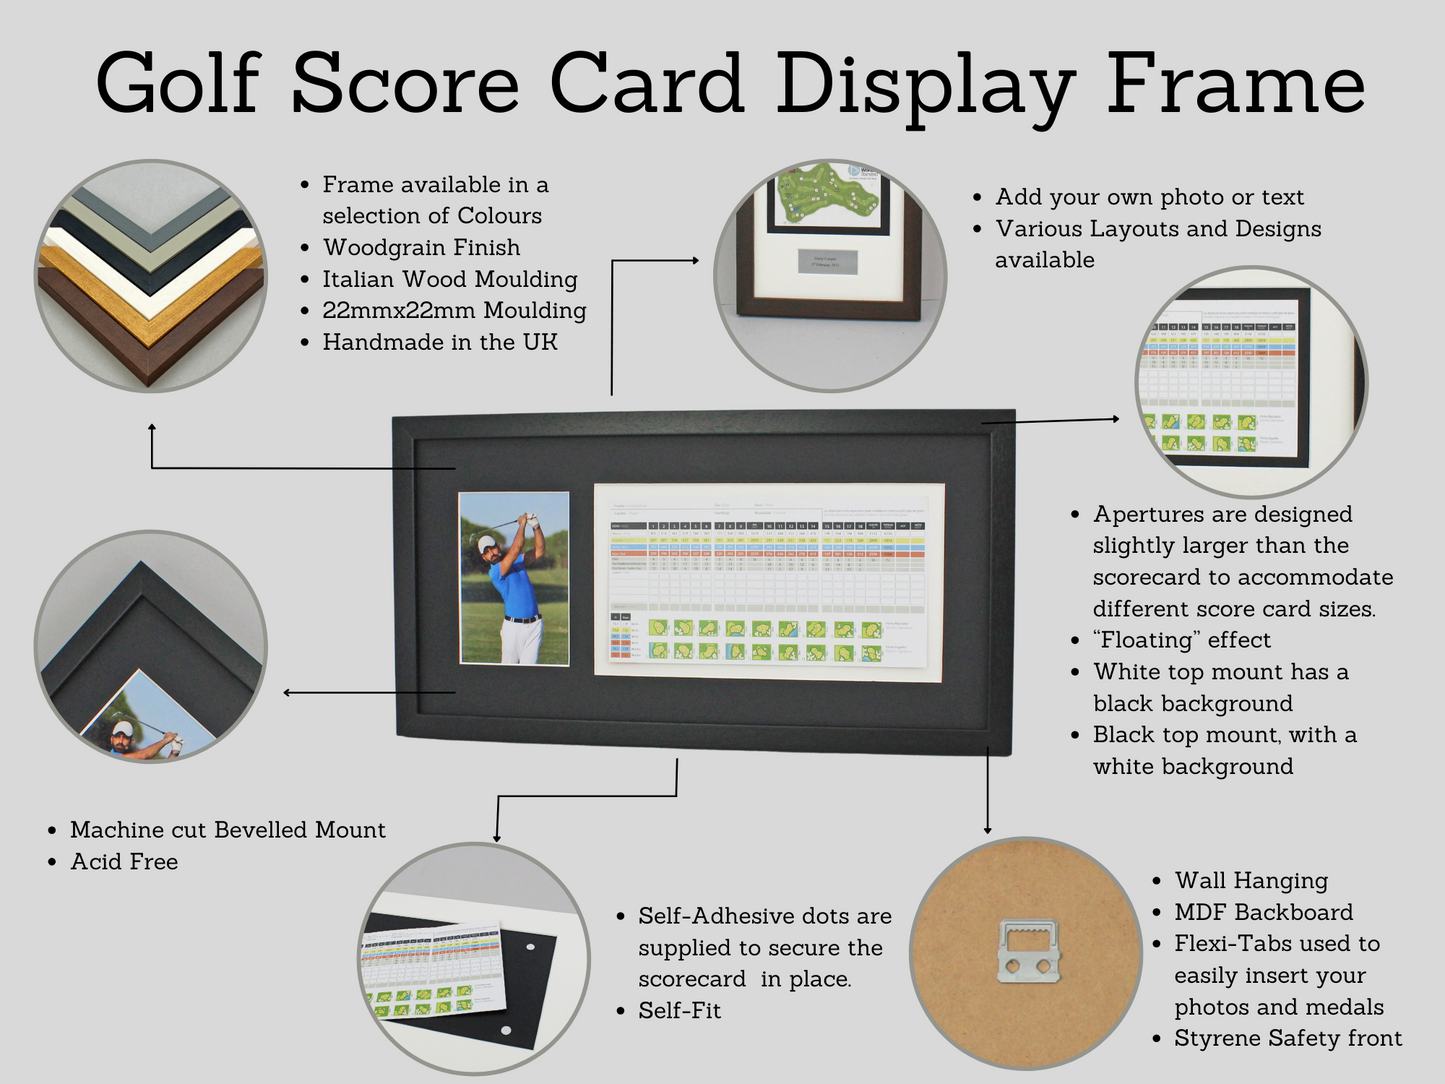 Personalised Golf Score Card Display Frame. 20x40cm Frame | Score Card sizes can vary - Check your size before purchase.